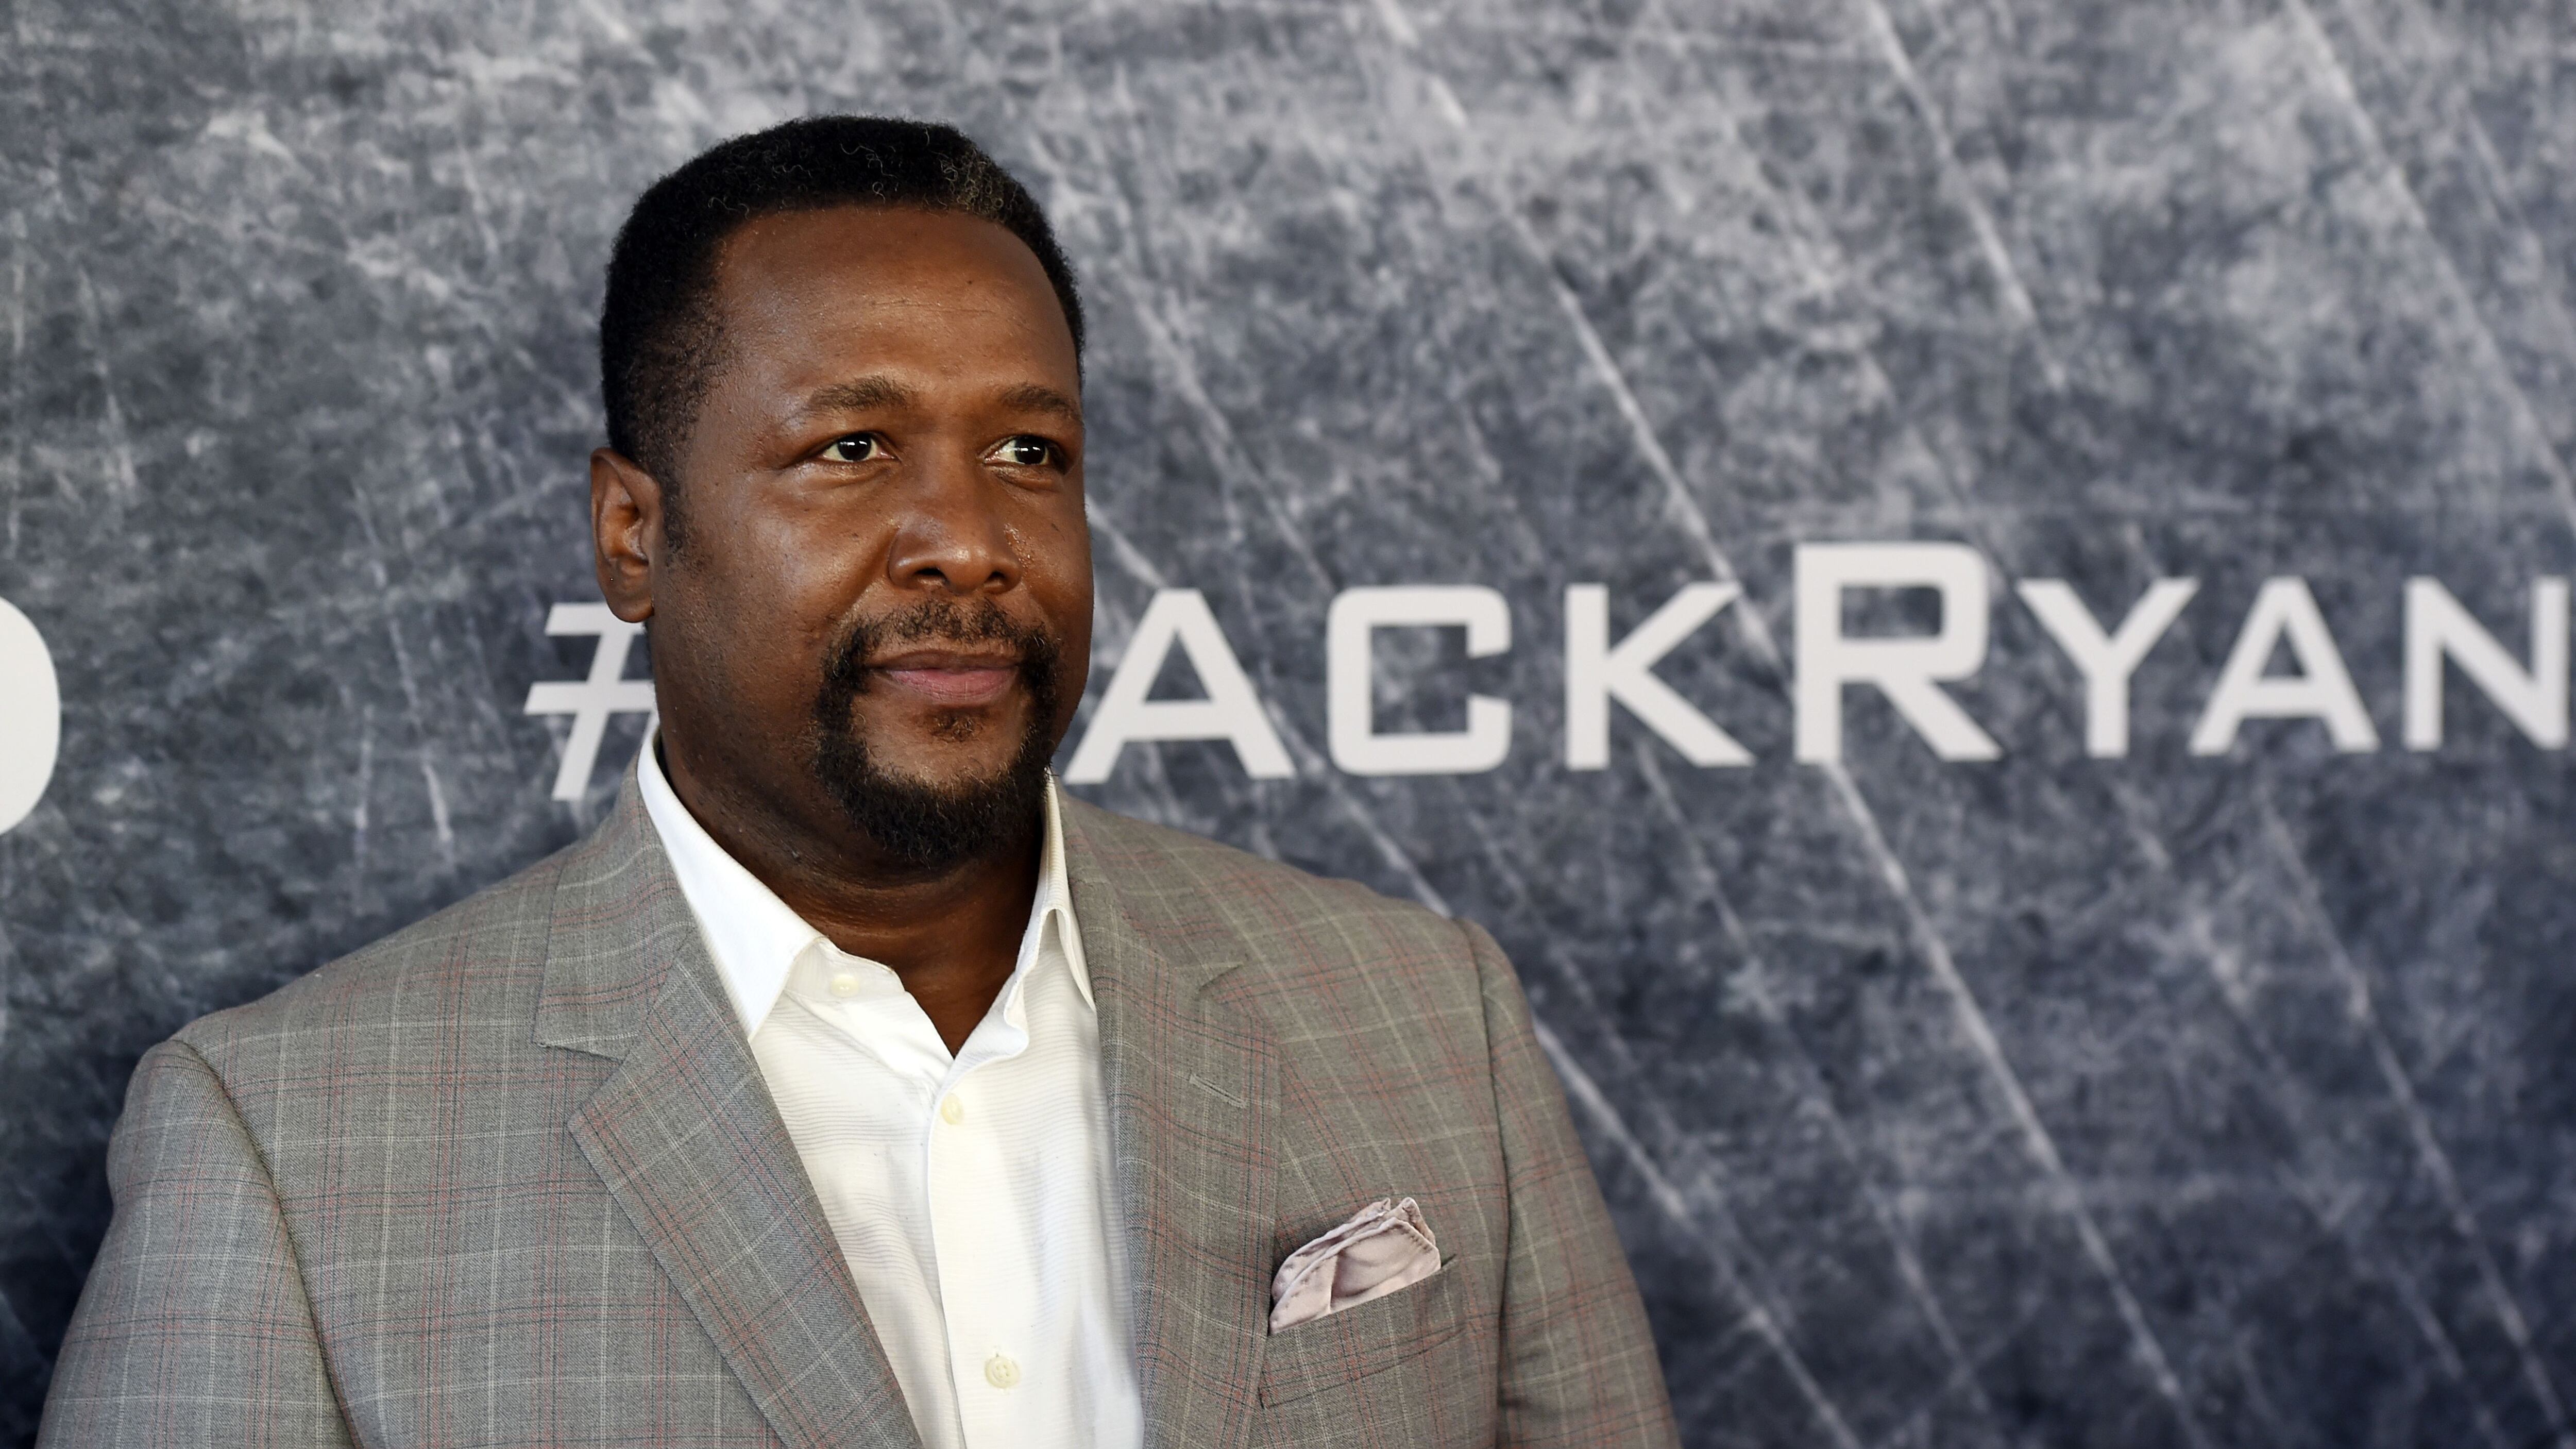 Wendell Pierce played Meghan’s father in the legal drama.